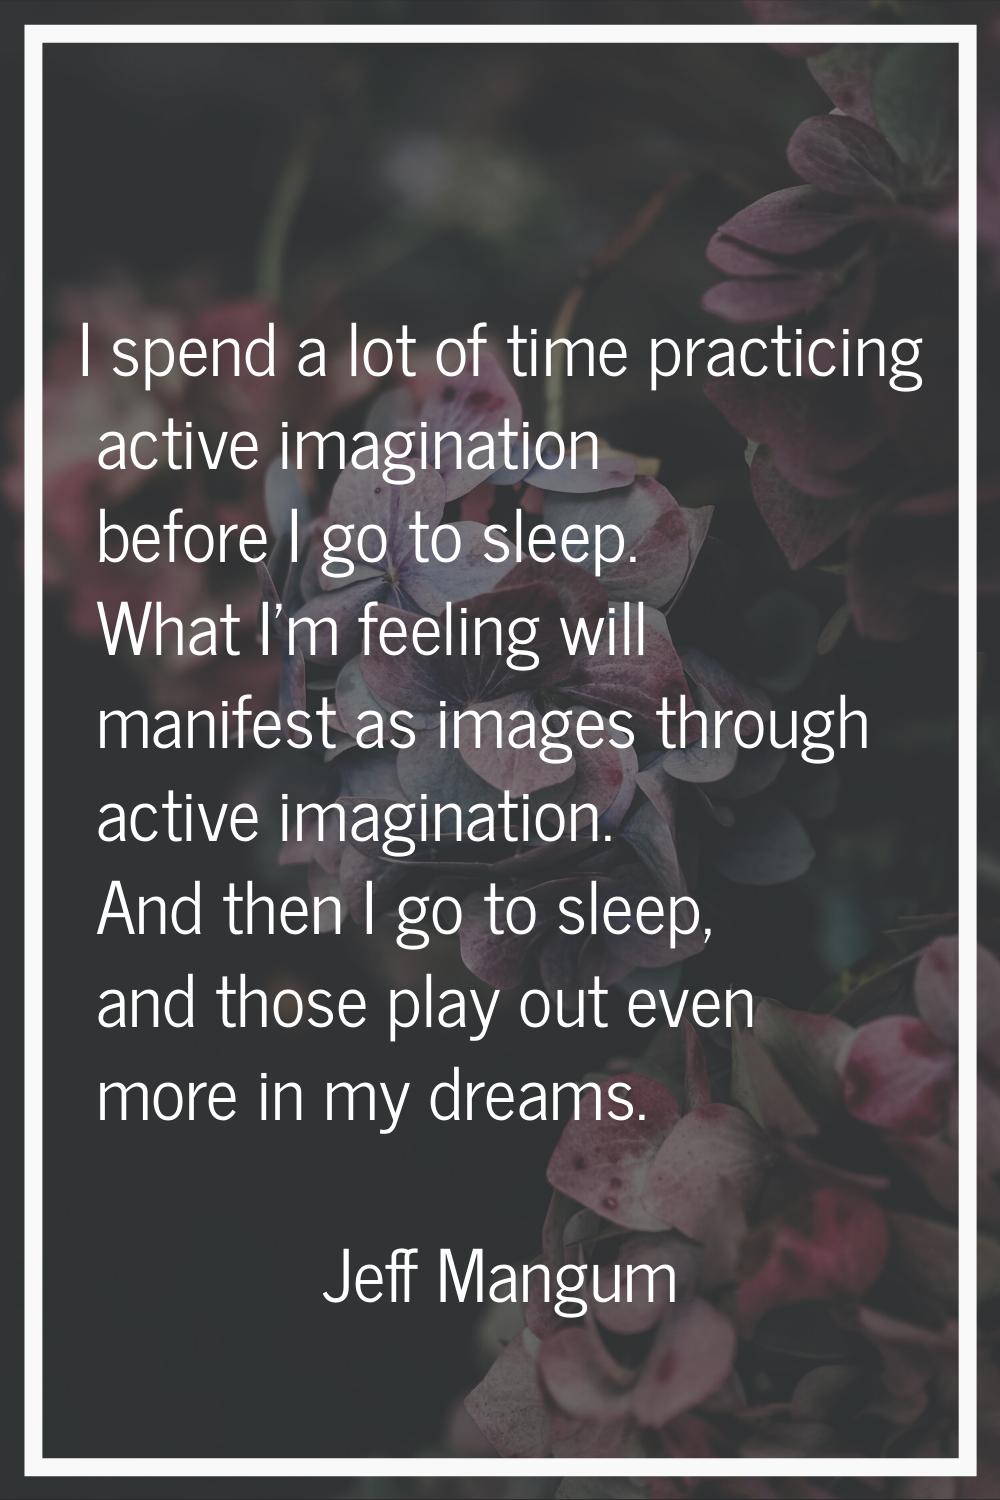 I spend a lot of time practicing active imagination before I go to sleep. What I'm feeling will man